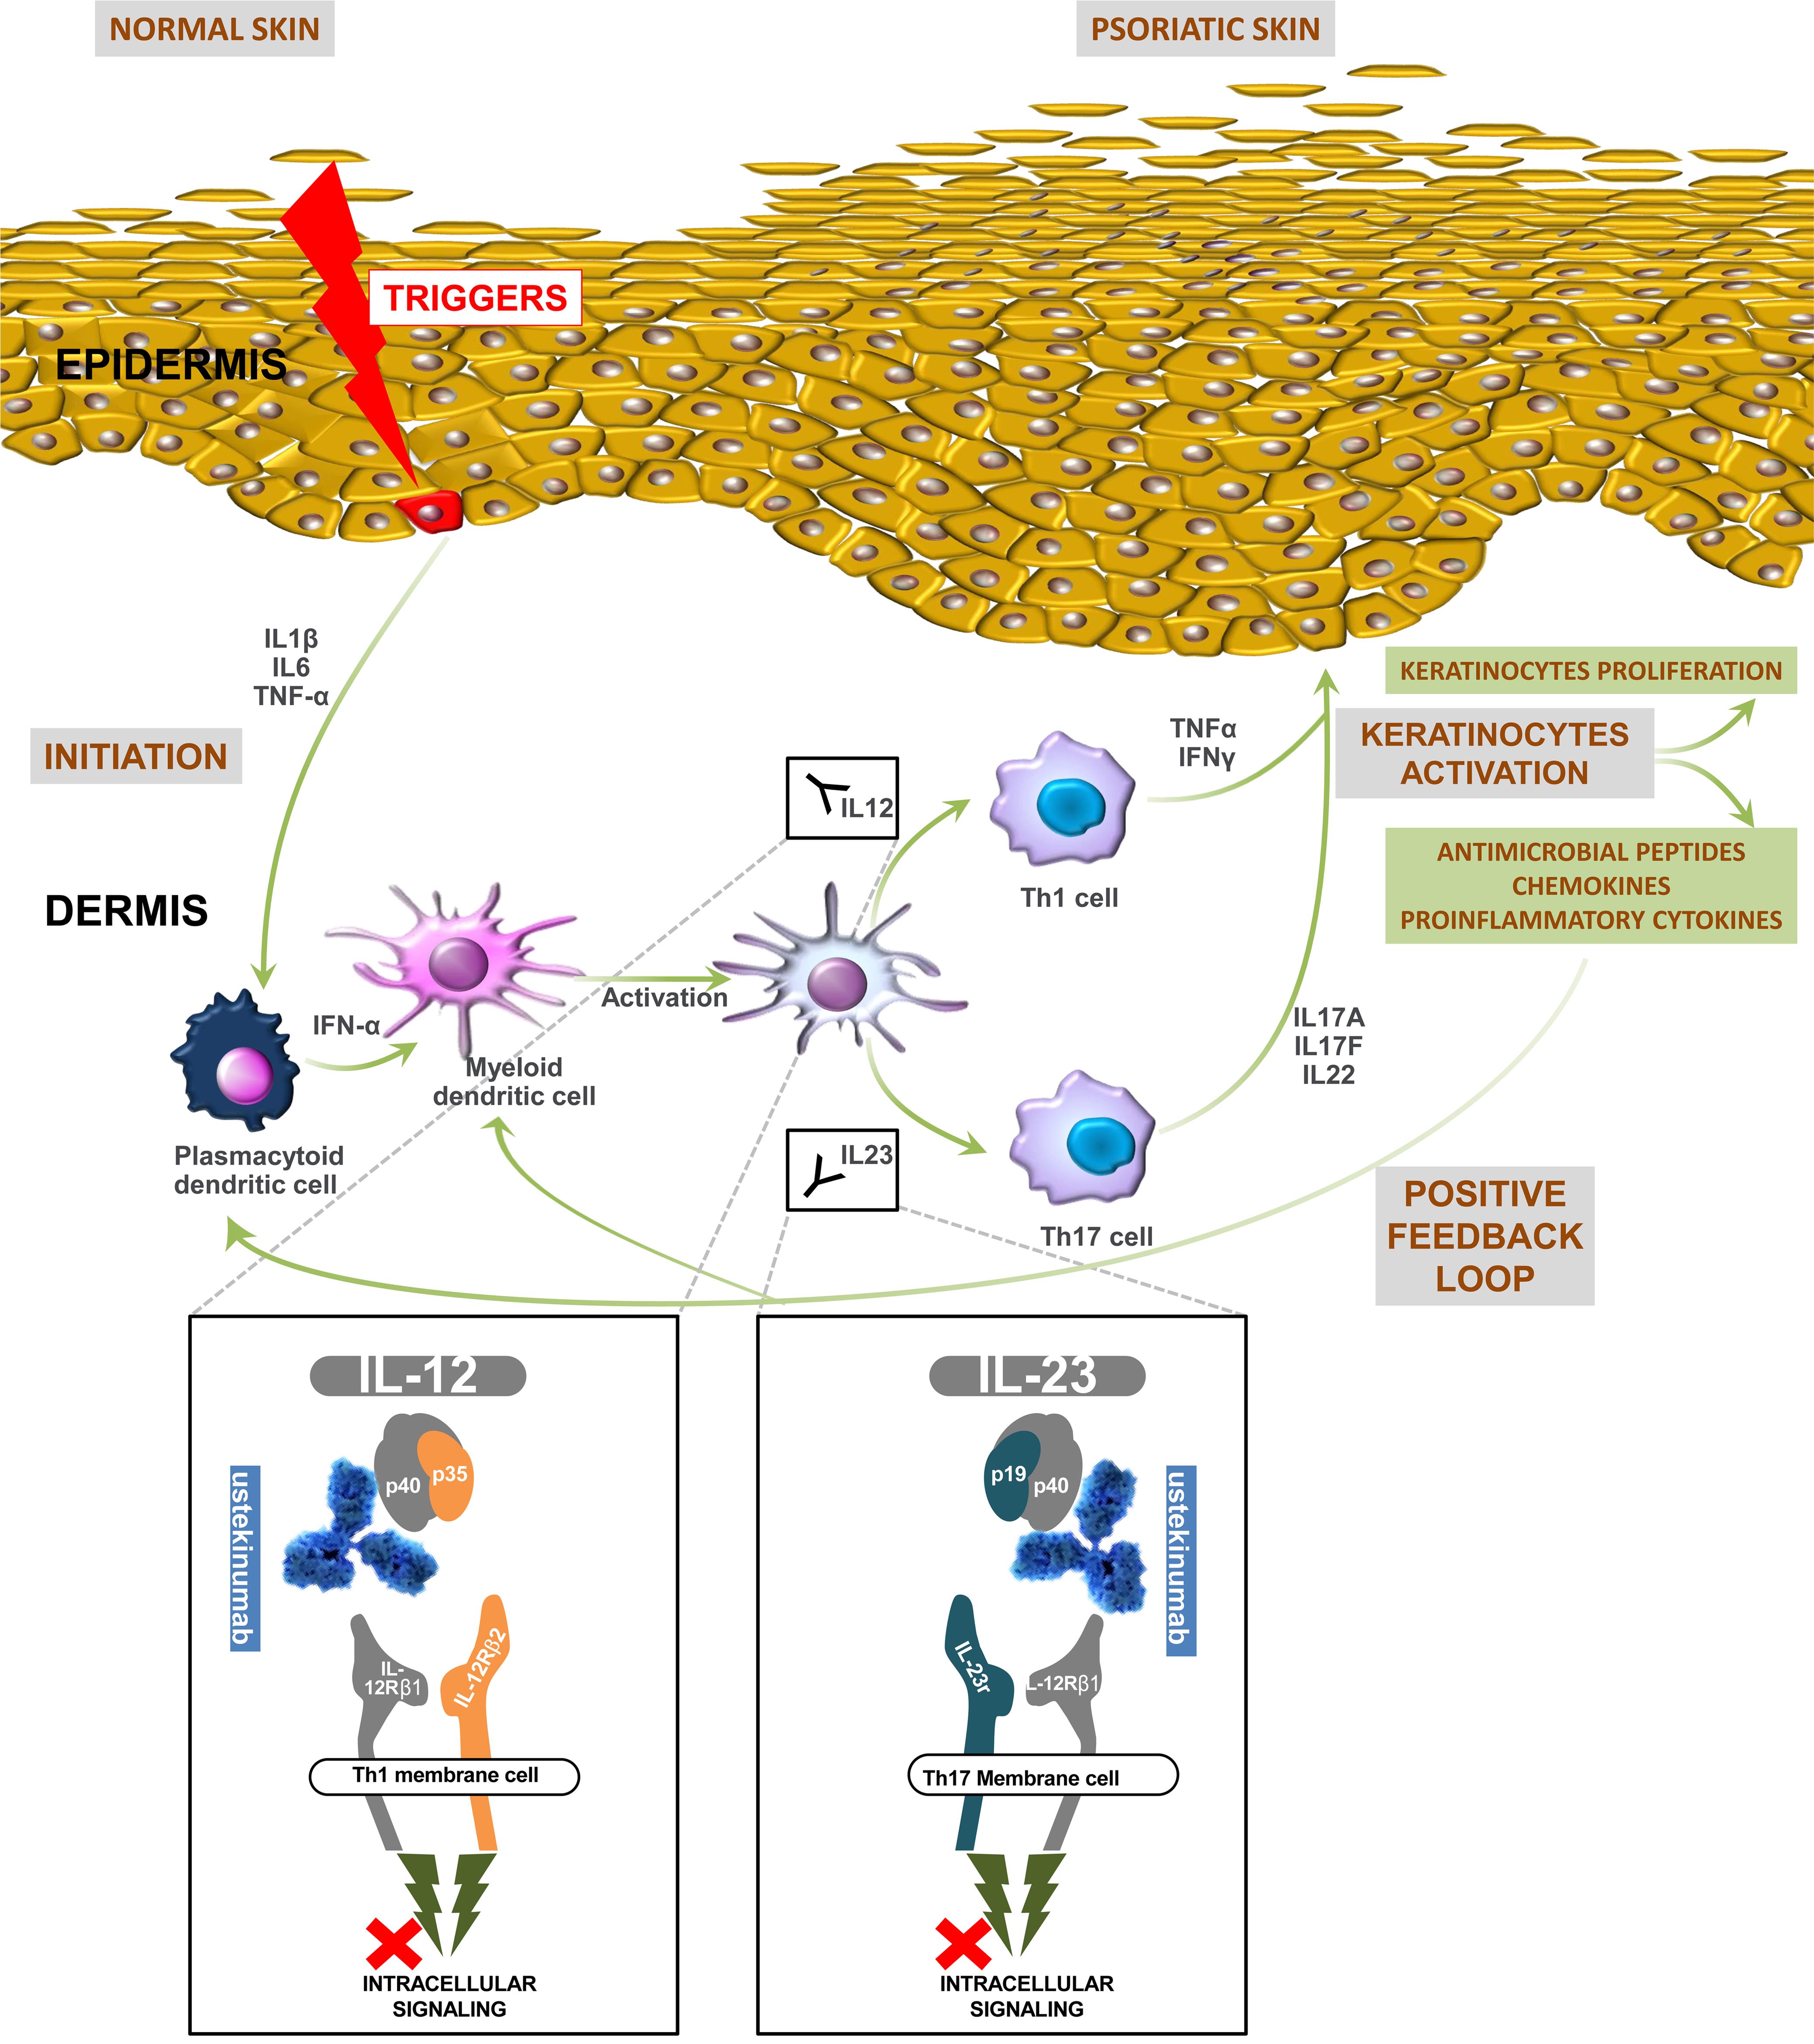 Current concepts in psoriasis pathophysiology and ustekinumab mechanism of action.